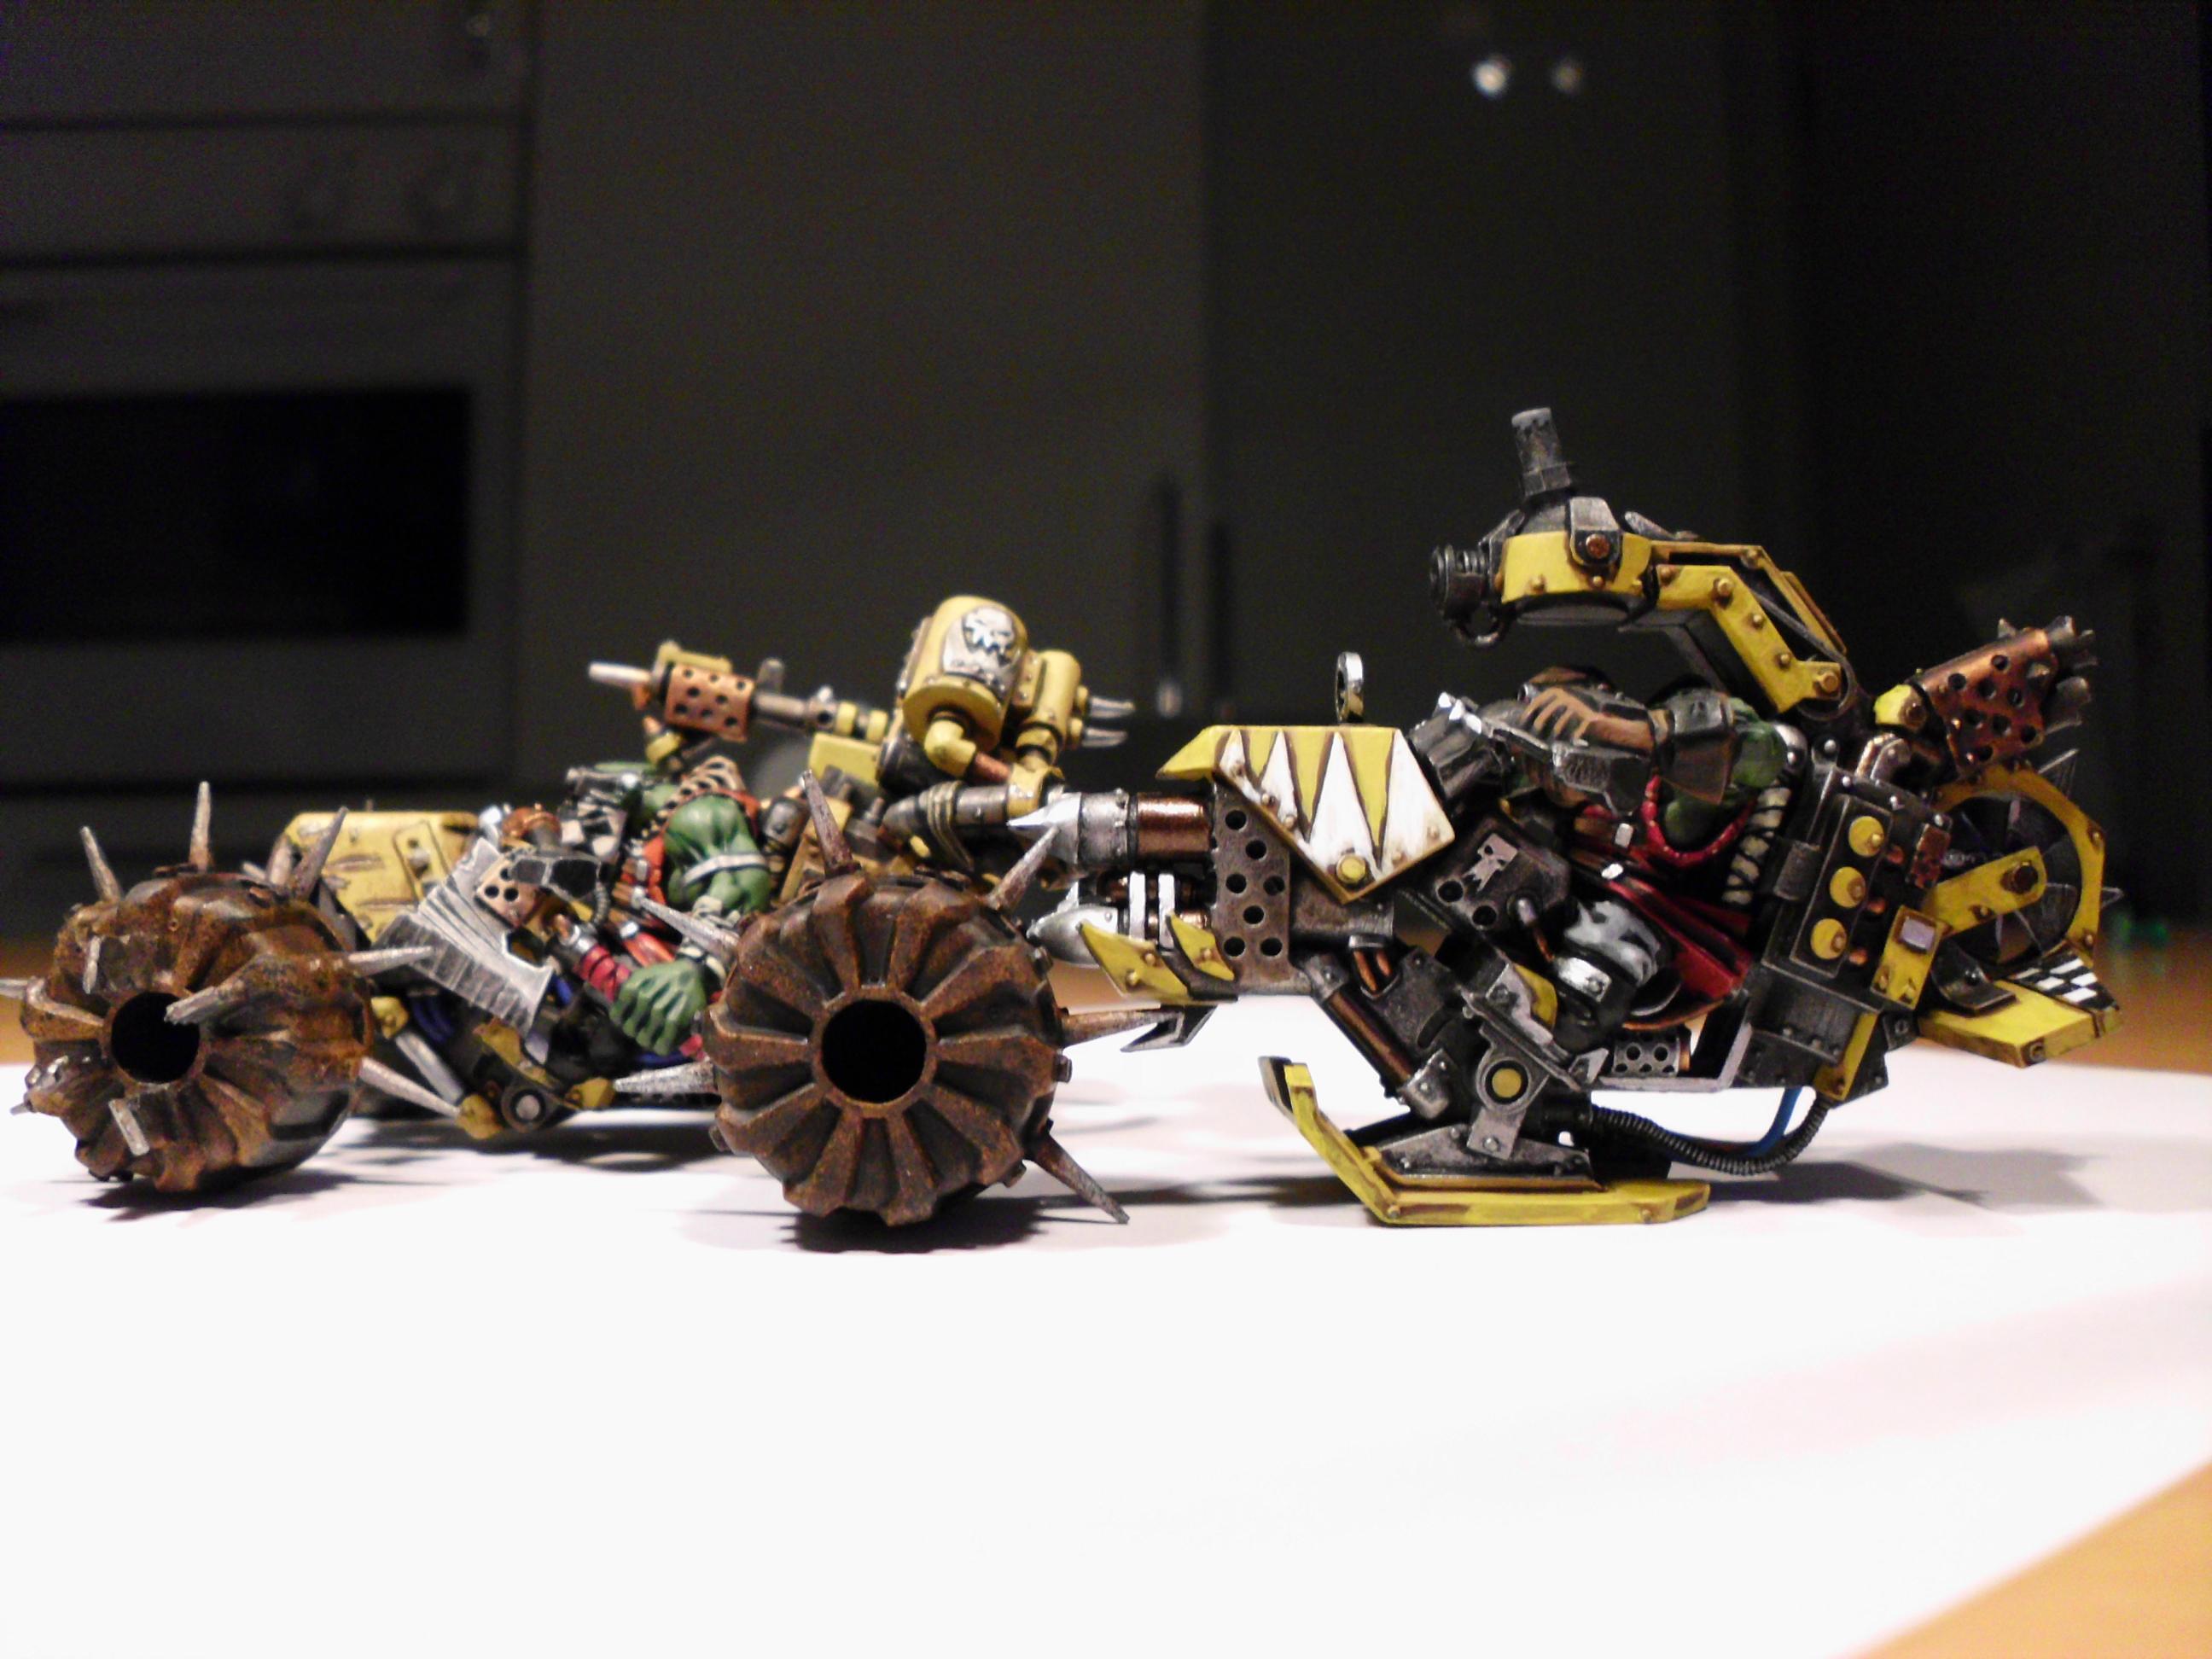 Deffcopter, Orks, Yellow